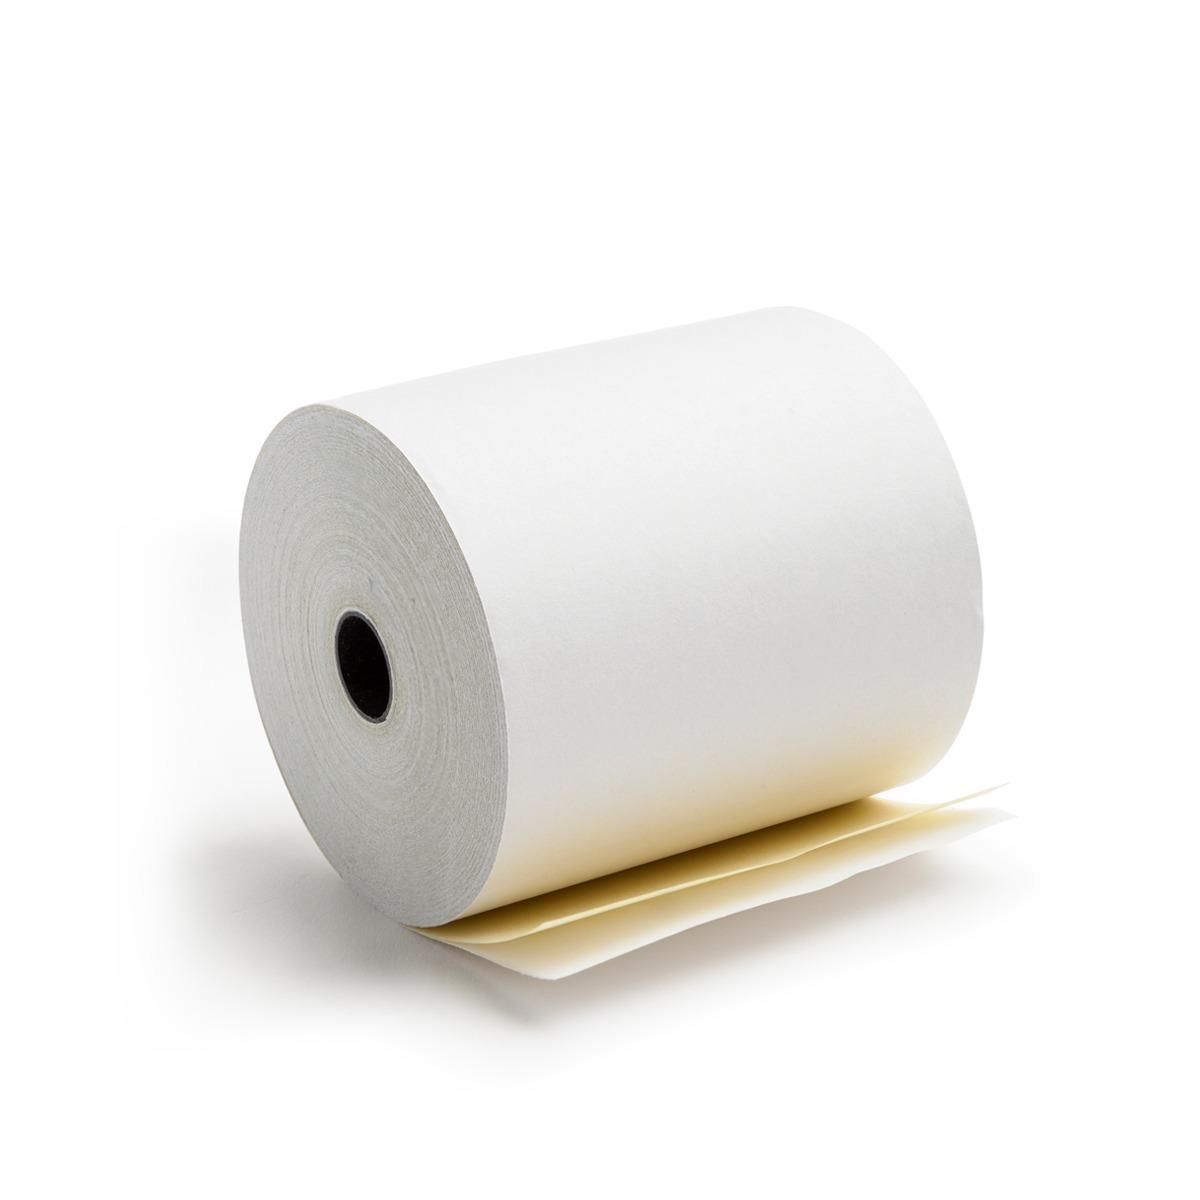 ROLLO PAPEL P/MAQ 74 MM X 30 MTS X 10 QUIMICO MAUGER